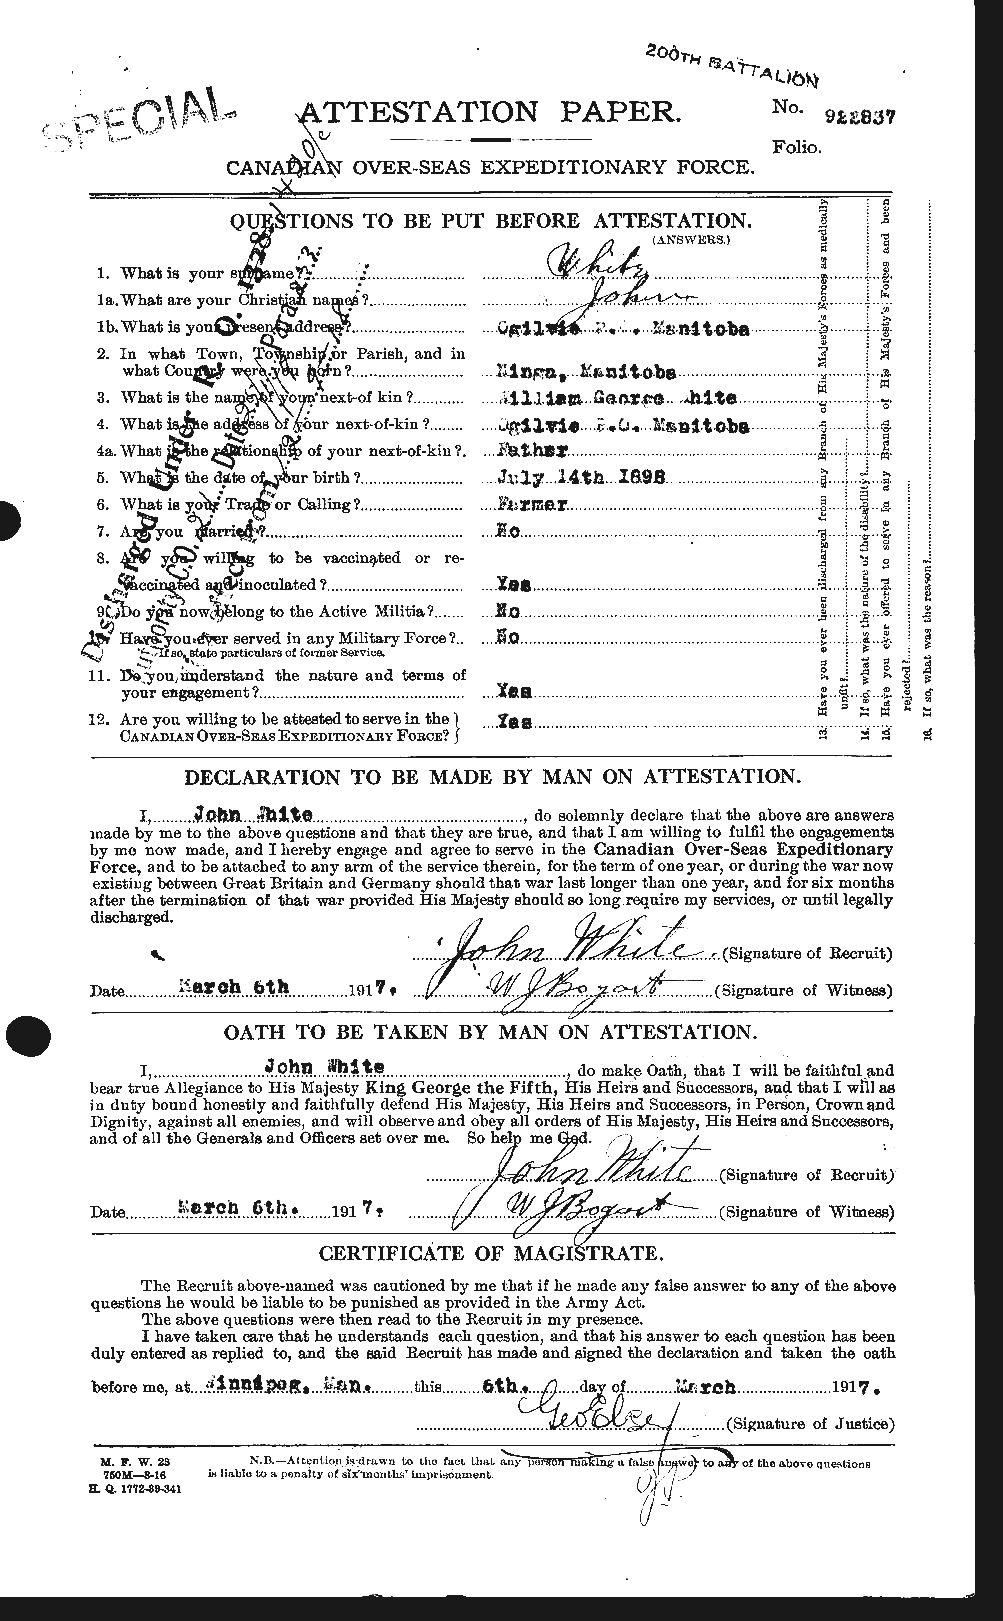 Personnel Records of the First World War - CEF 671520a